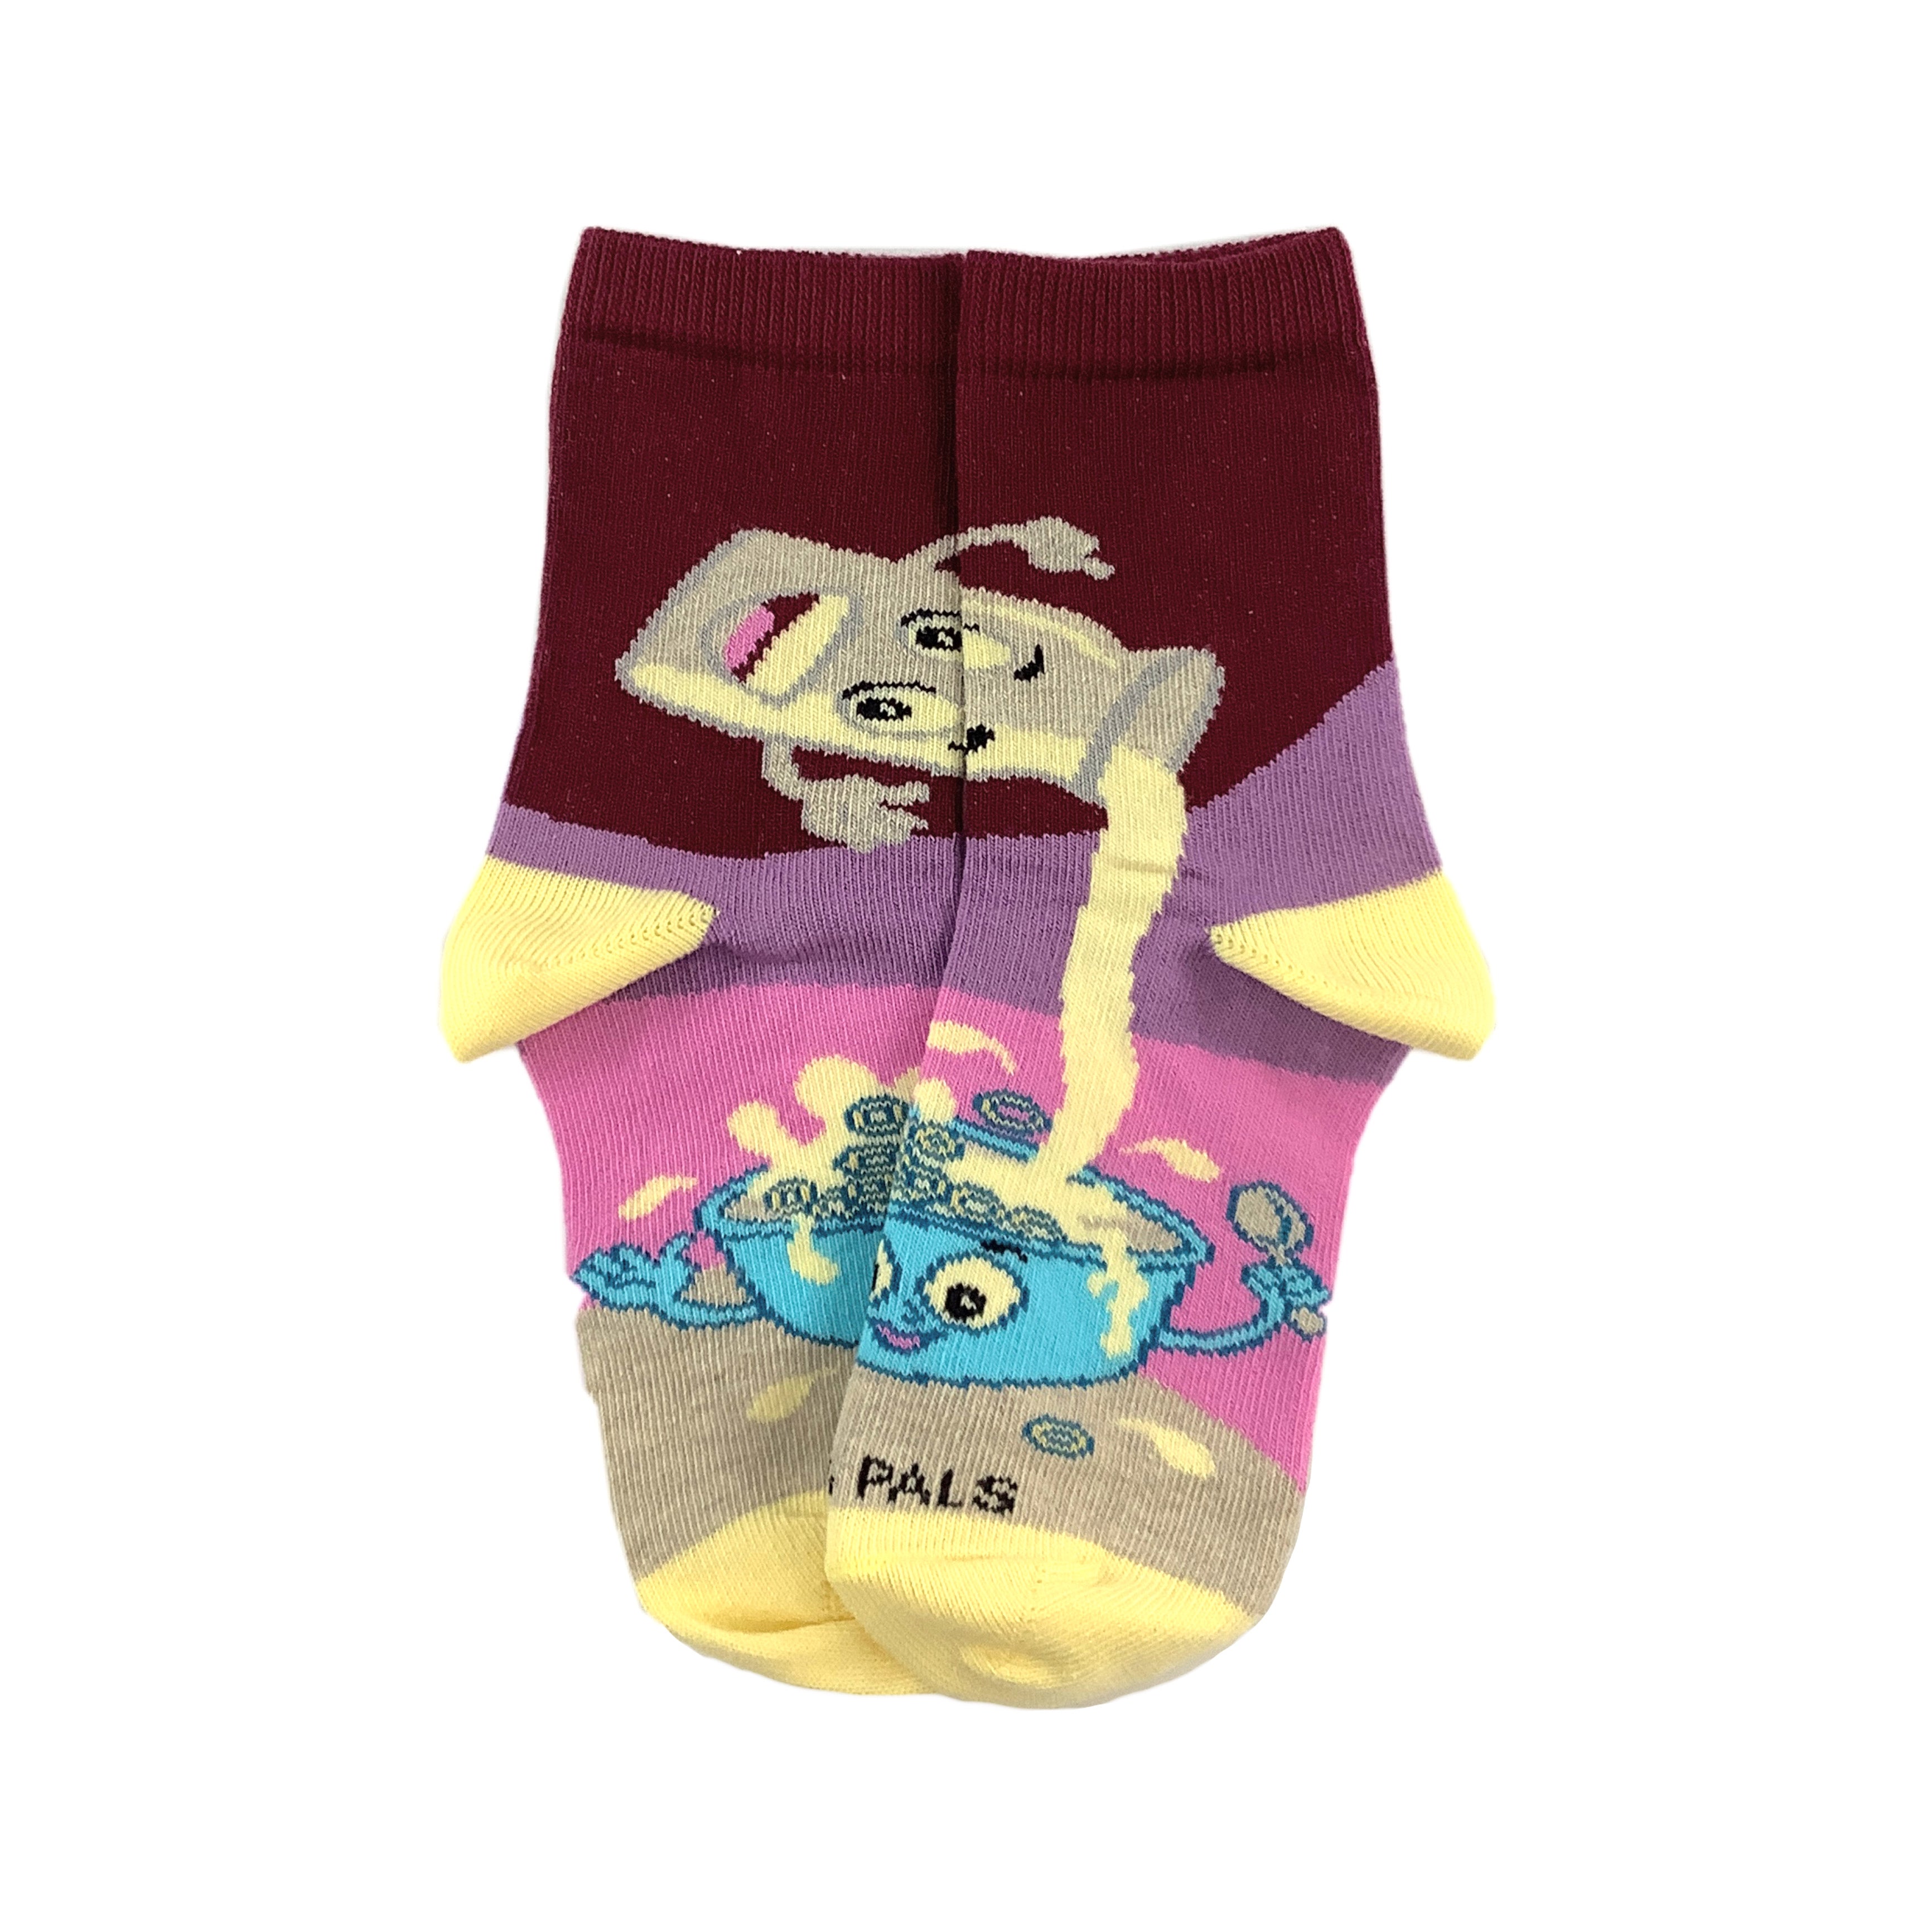 Fun Cereal and Milk Sock (Ages 3-7) from the Sock Panda